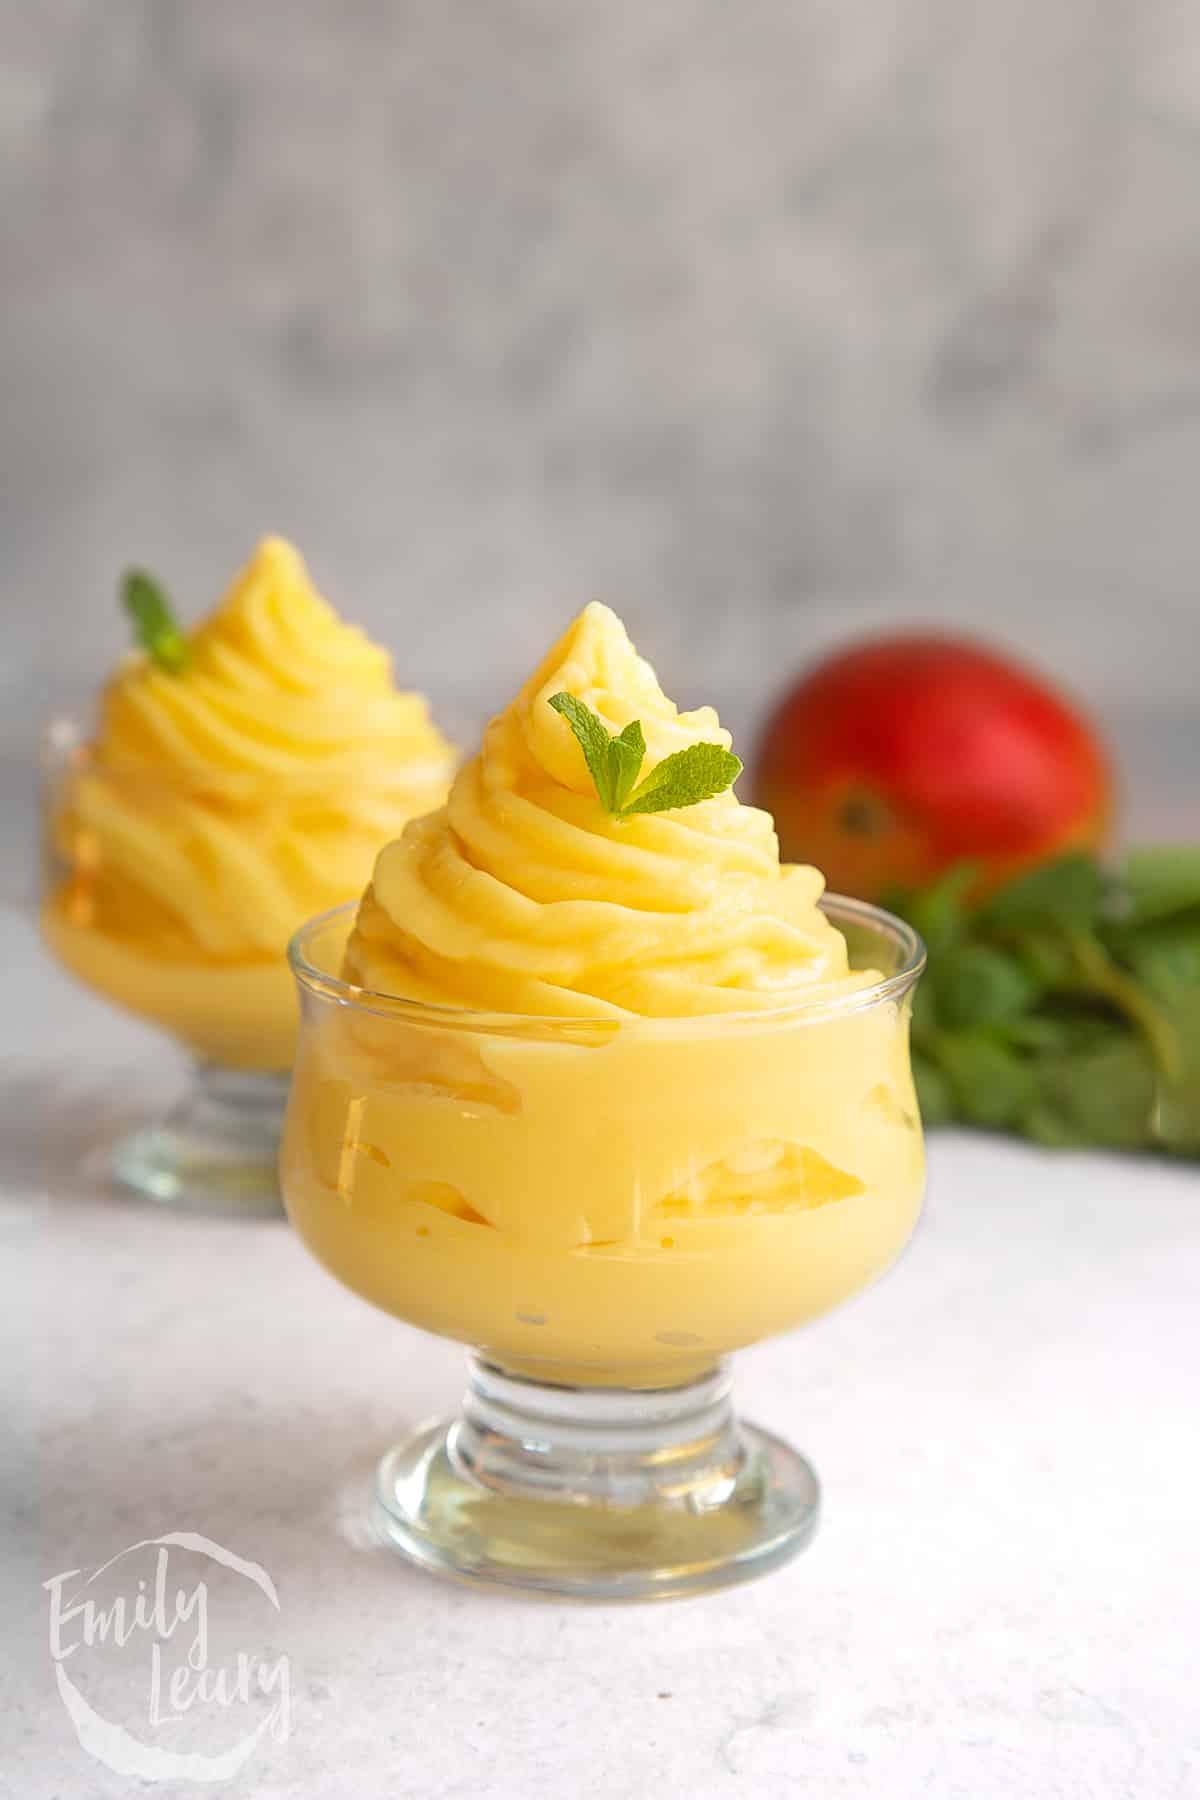 a decadent glass filled with swirled mango ice cream topped with a small mint leaf.